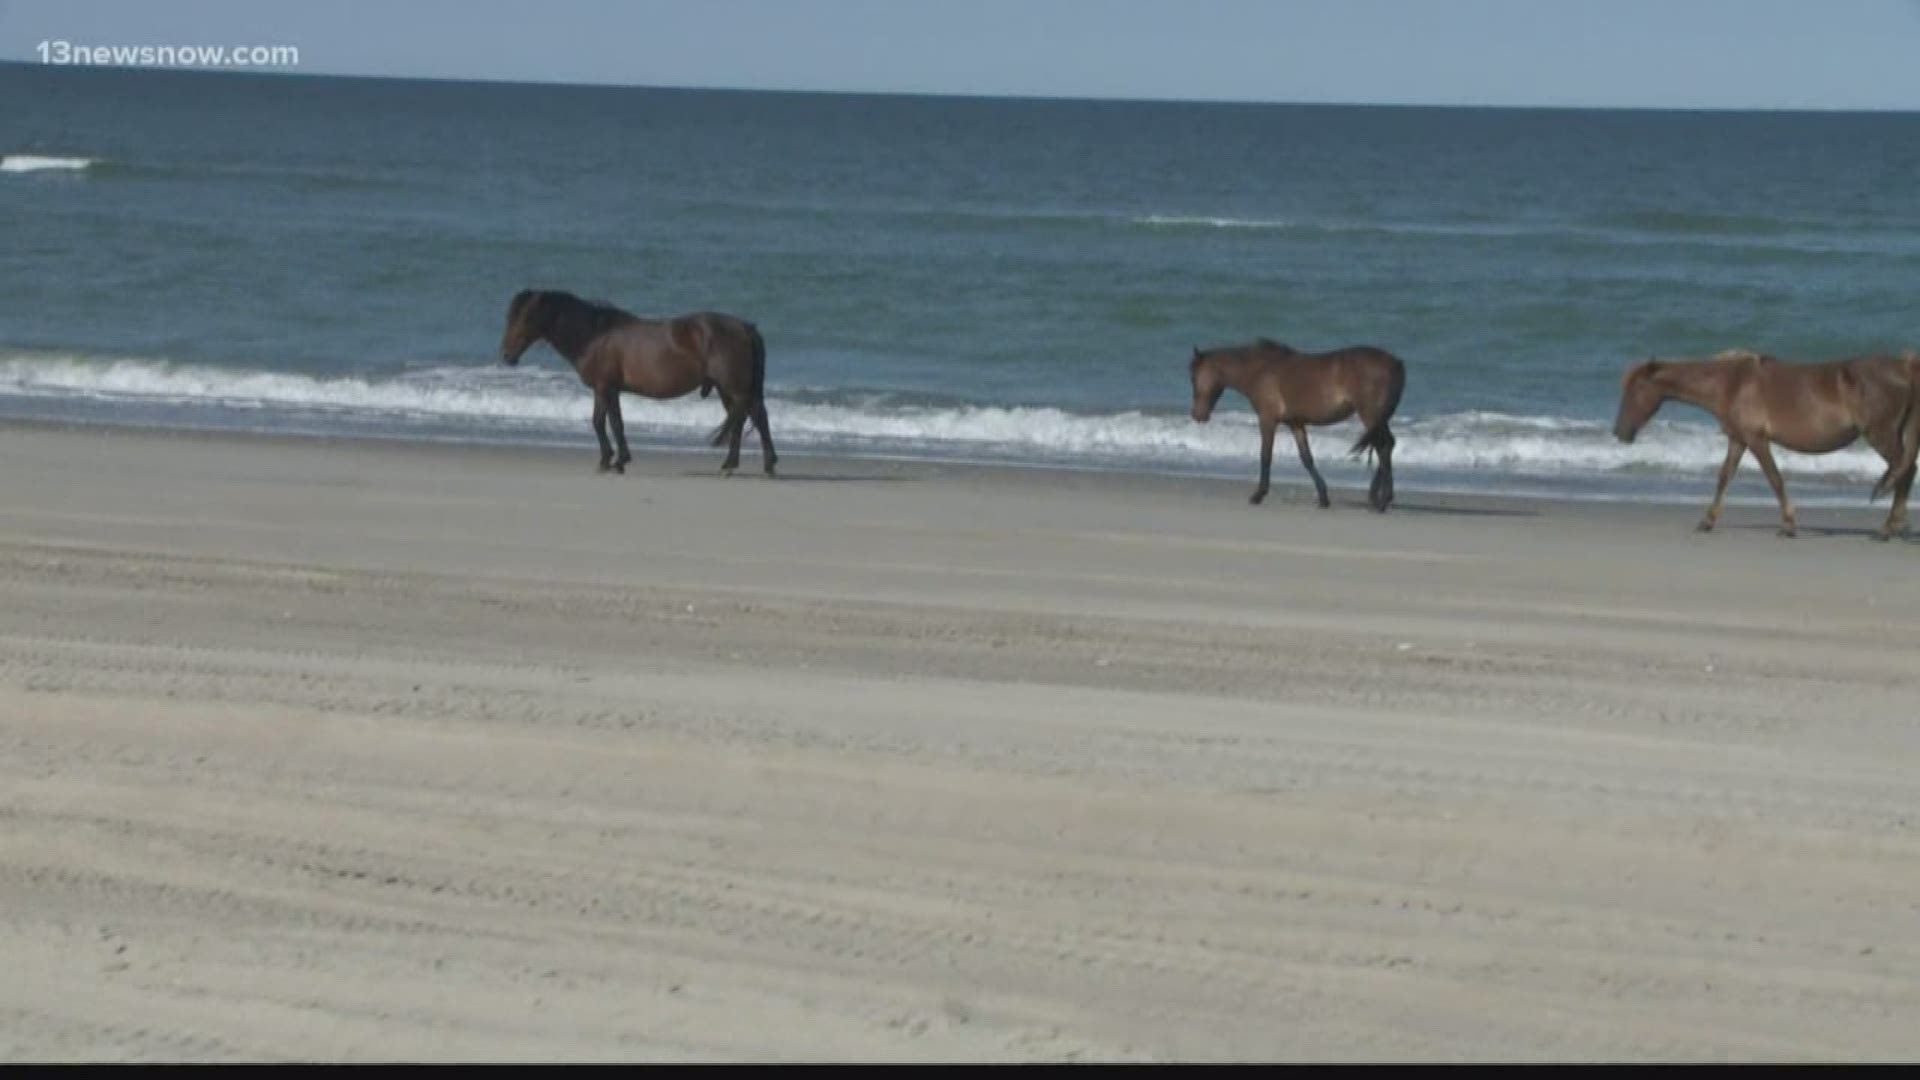 The tour guide for Wild Horse Adventure Tours says the horses' majestic beautify brings in thousands every summer, but many of them are getting their vehicles stuck in the soft sand.